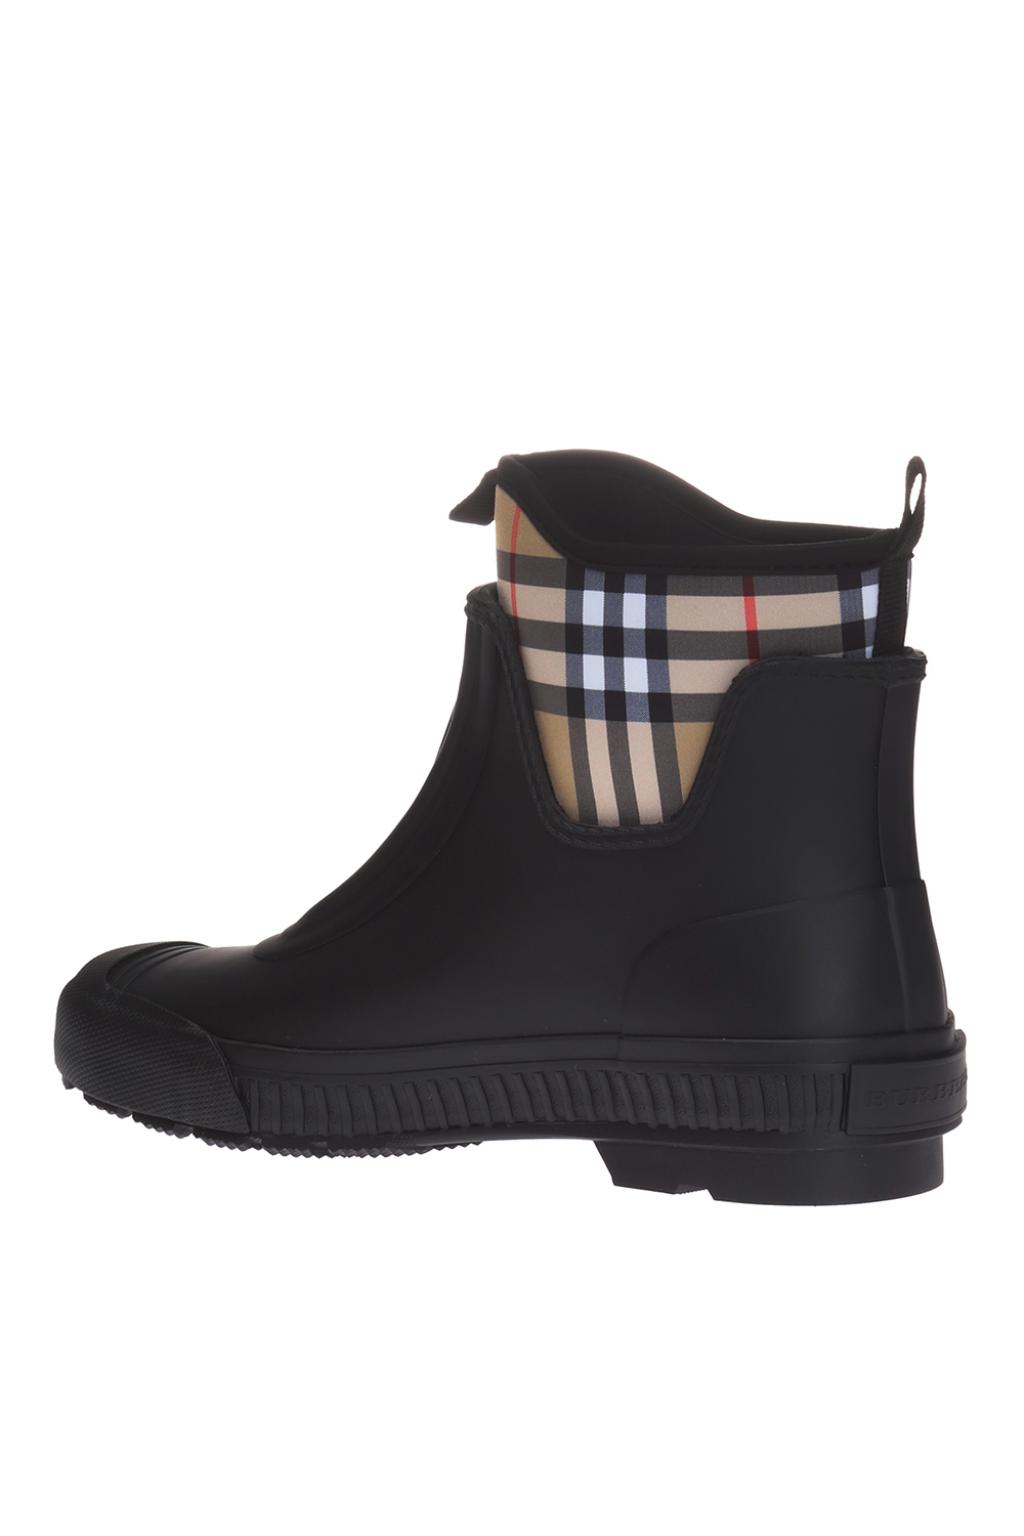 Boots Burberry - Freddie rain boots in black - 8007035